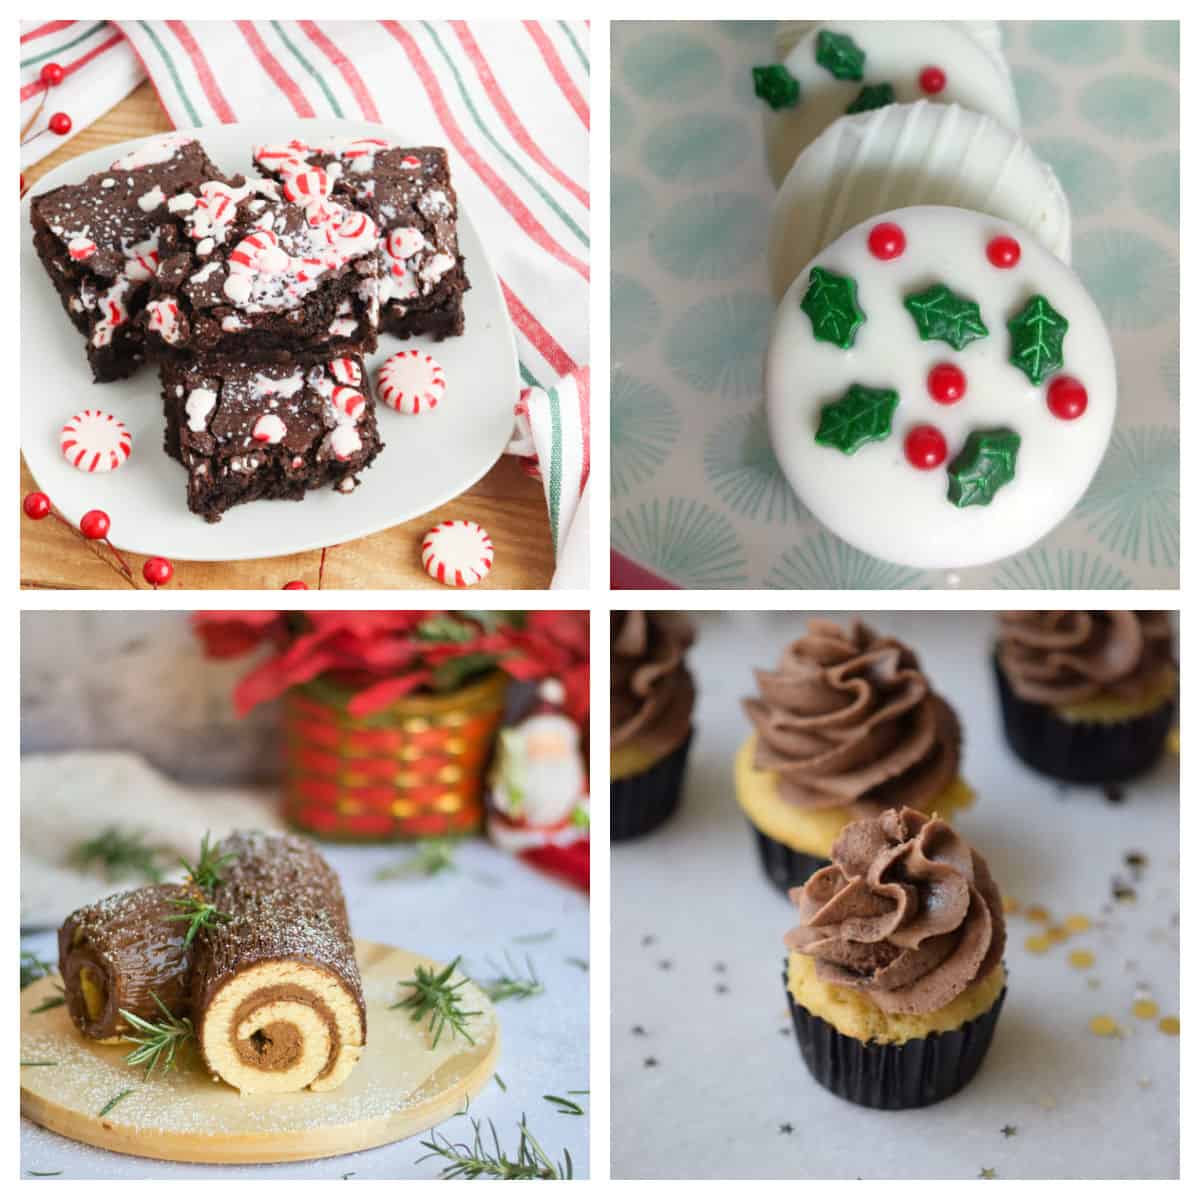 Chocolate Christmas desserts in a collage.